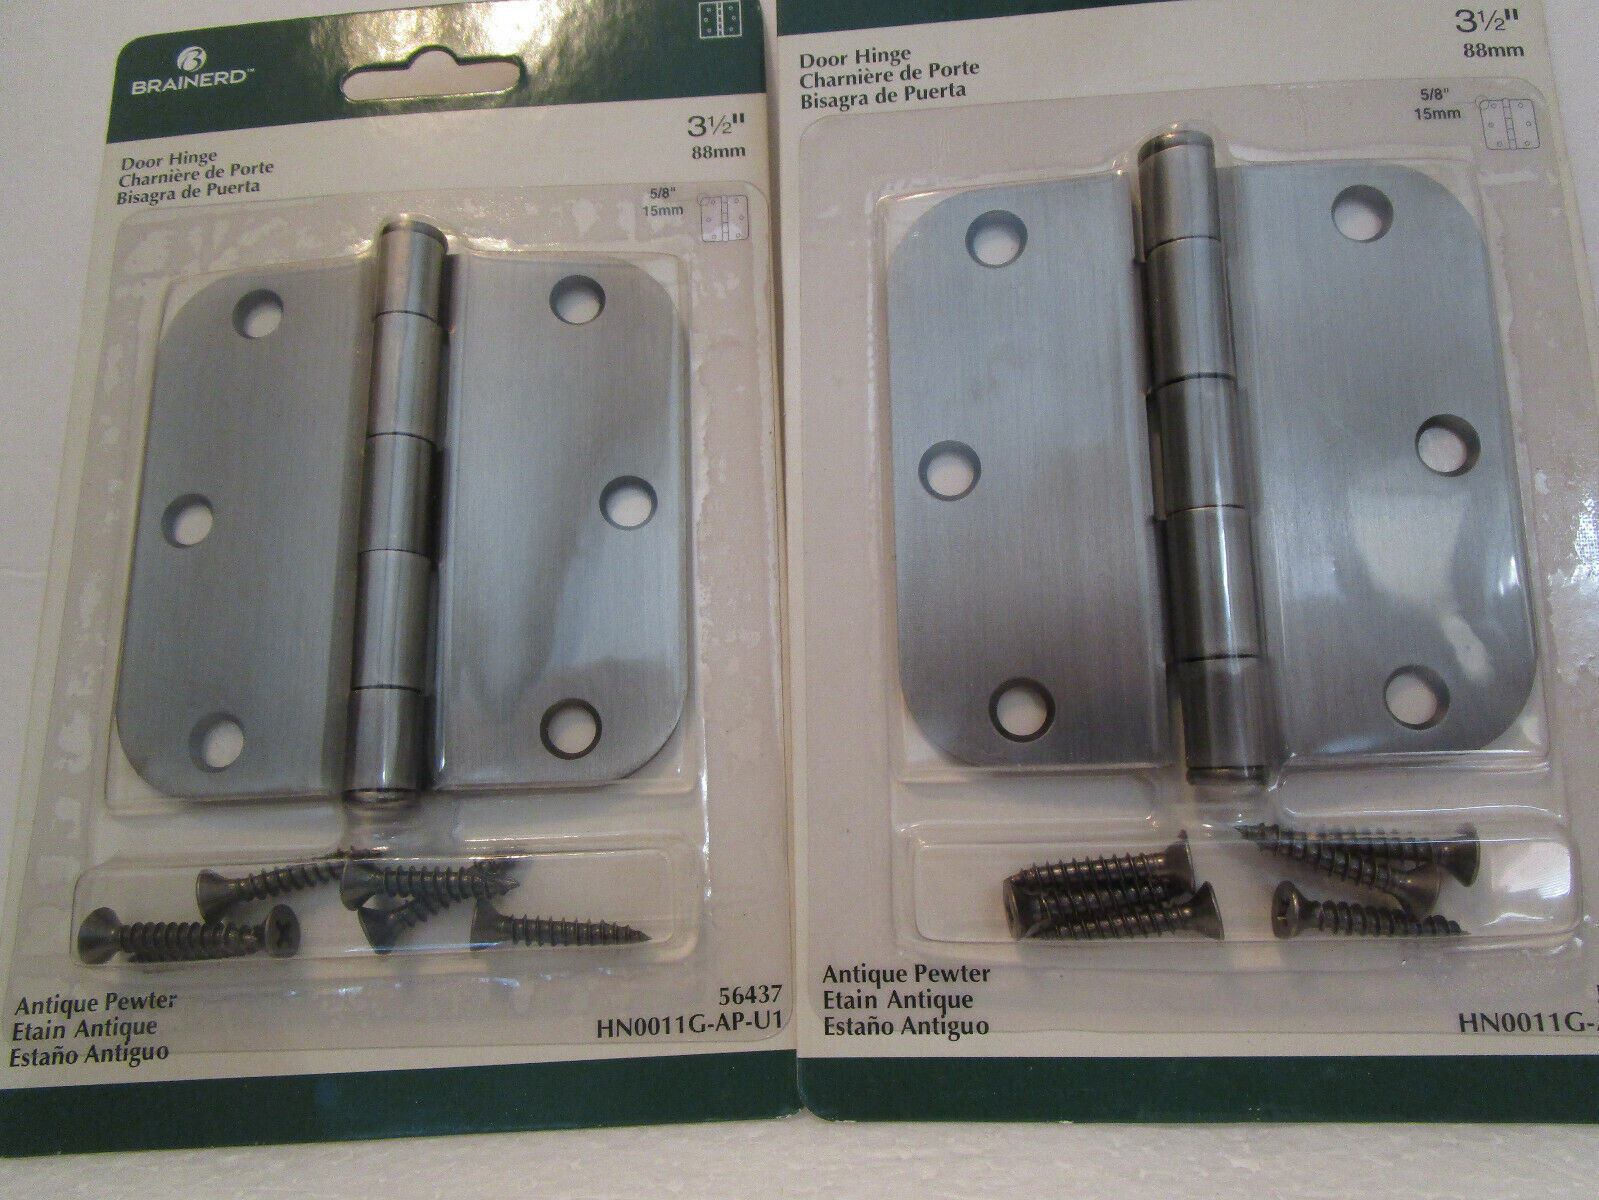 Lot of 2 BRAINERD 3.5" DOOR HINGE #56437 Antique Pewter NEW on card FAST SHIPPED - $9.99